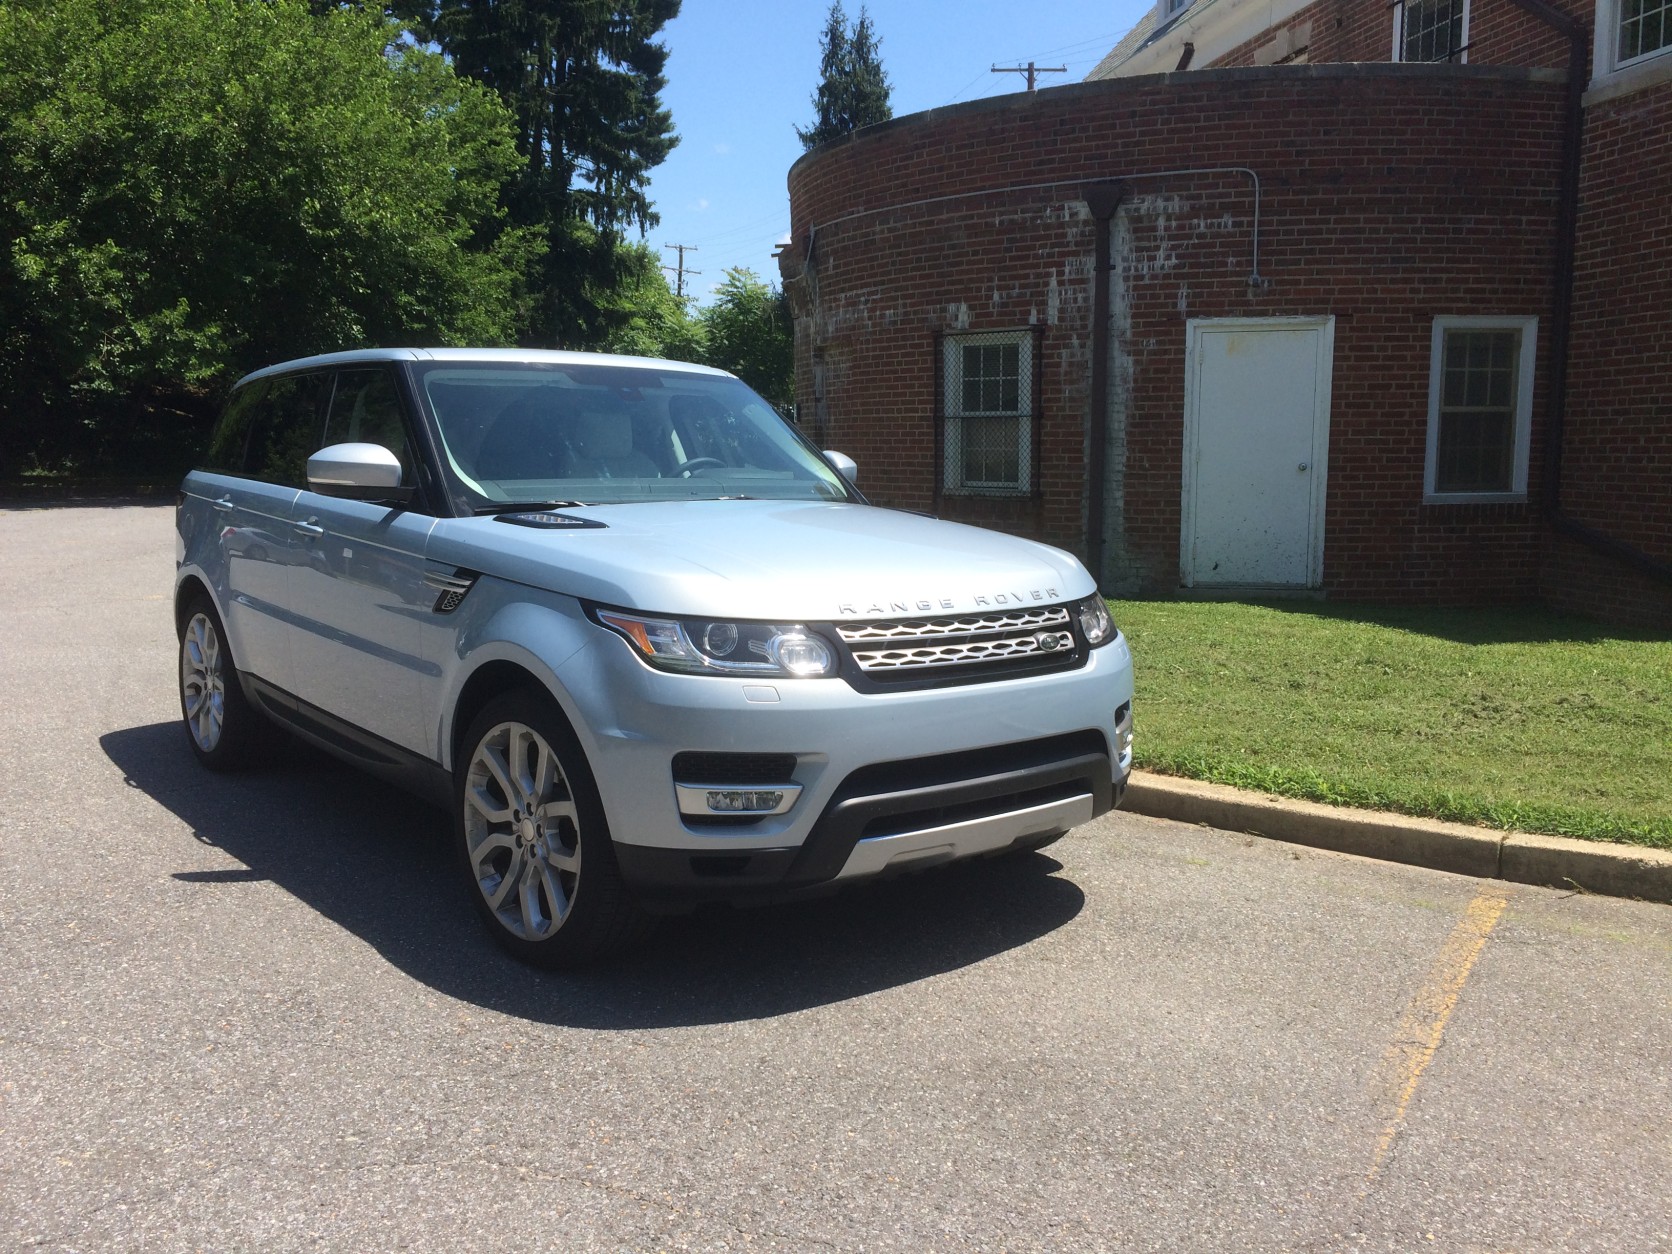 The Range Rover Sport V6 has a starting price around $63,000. (WTOP/Mike Parris)